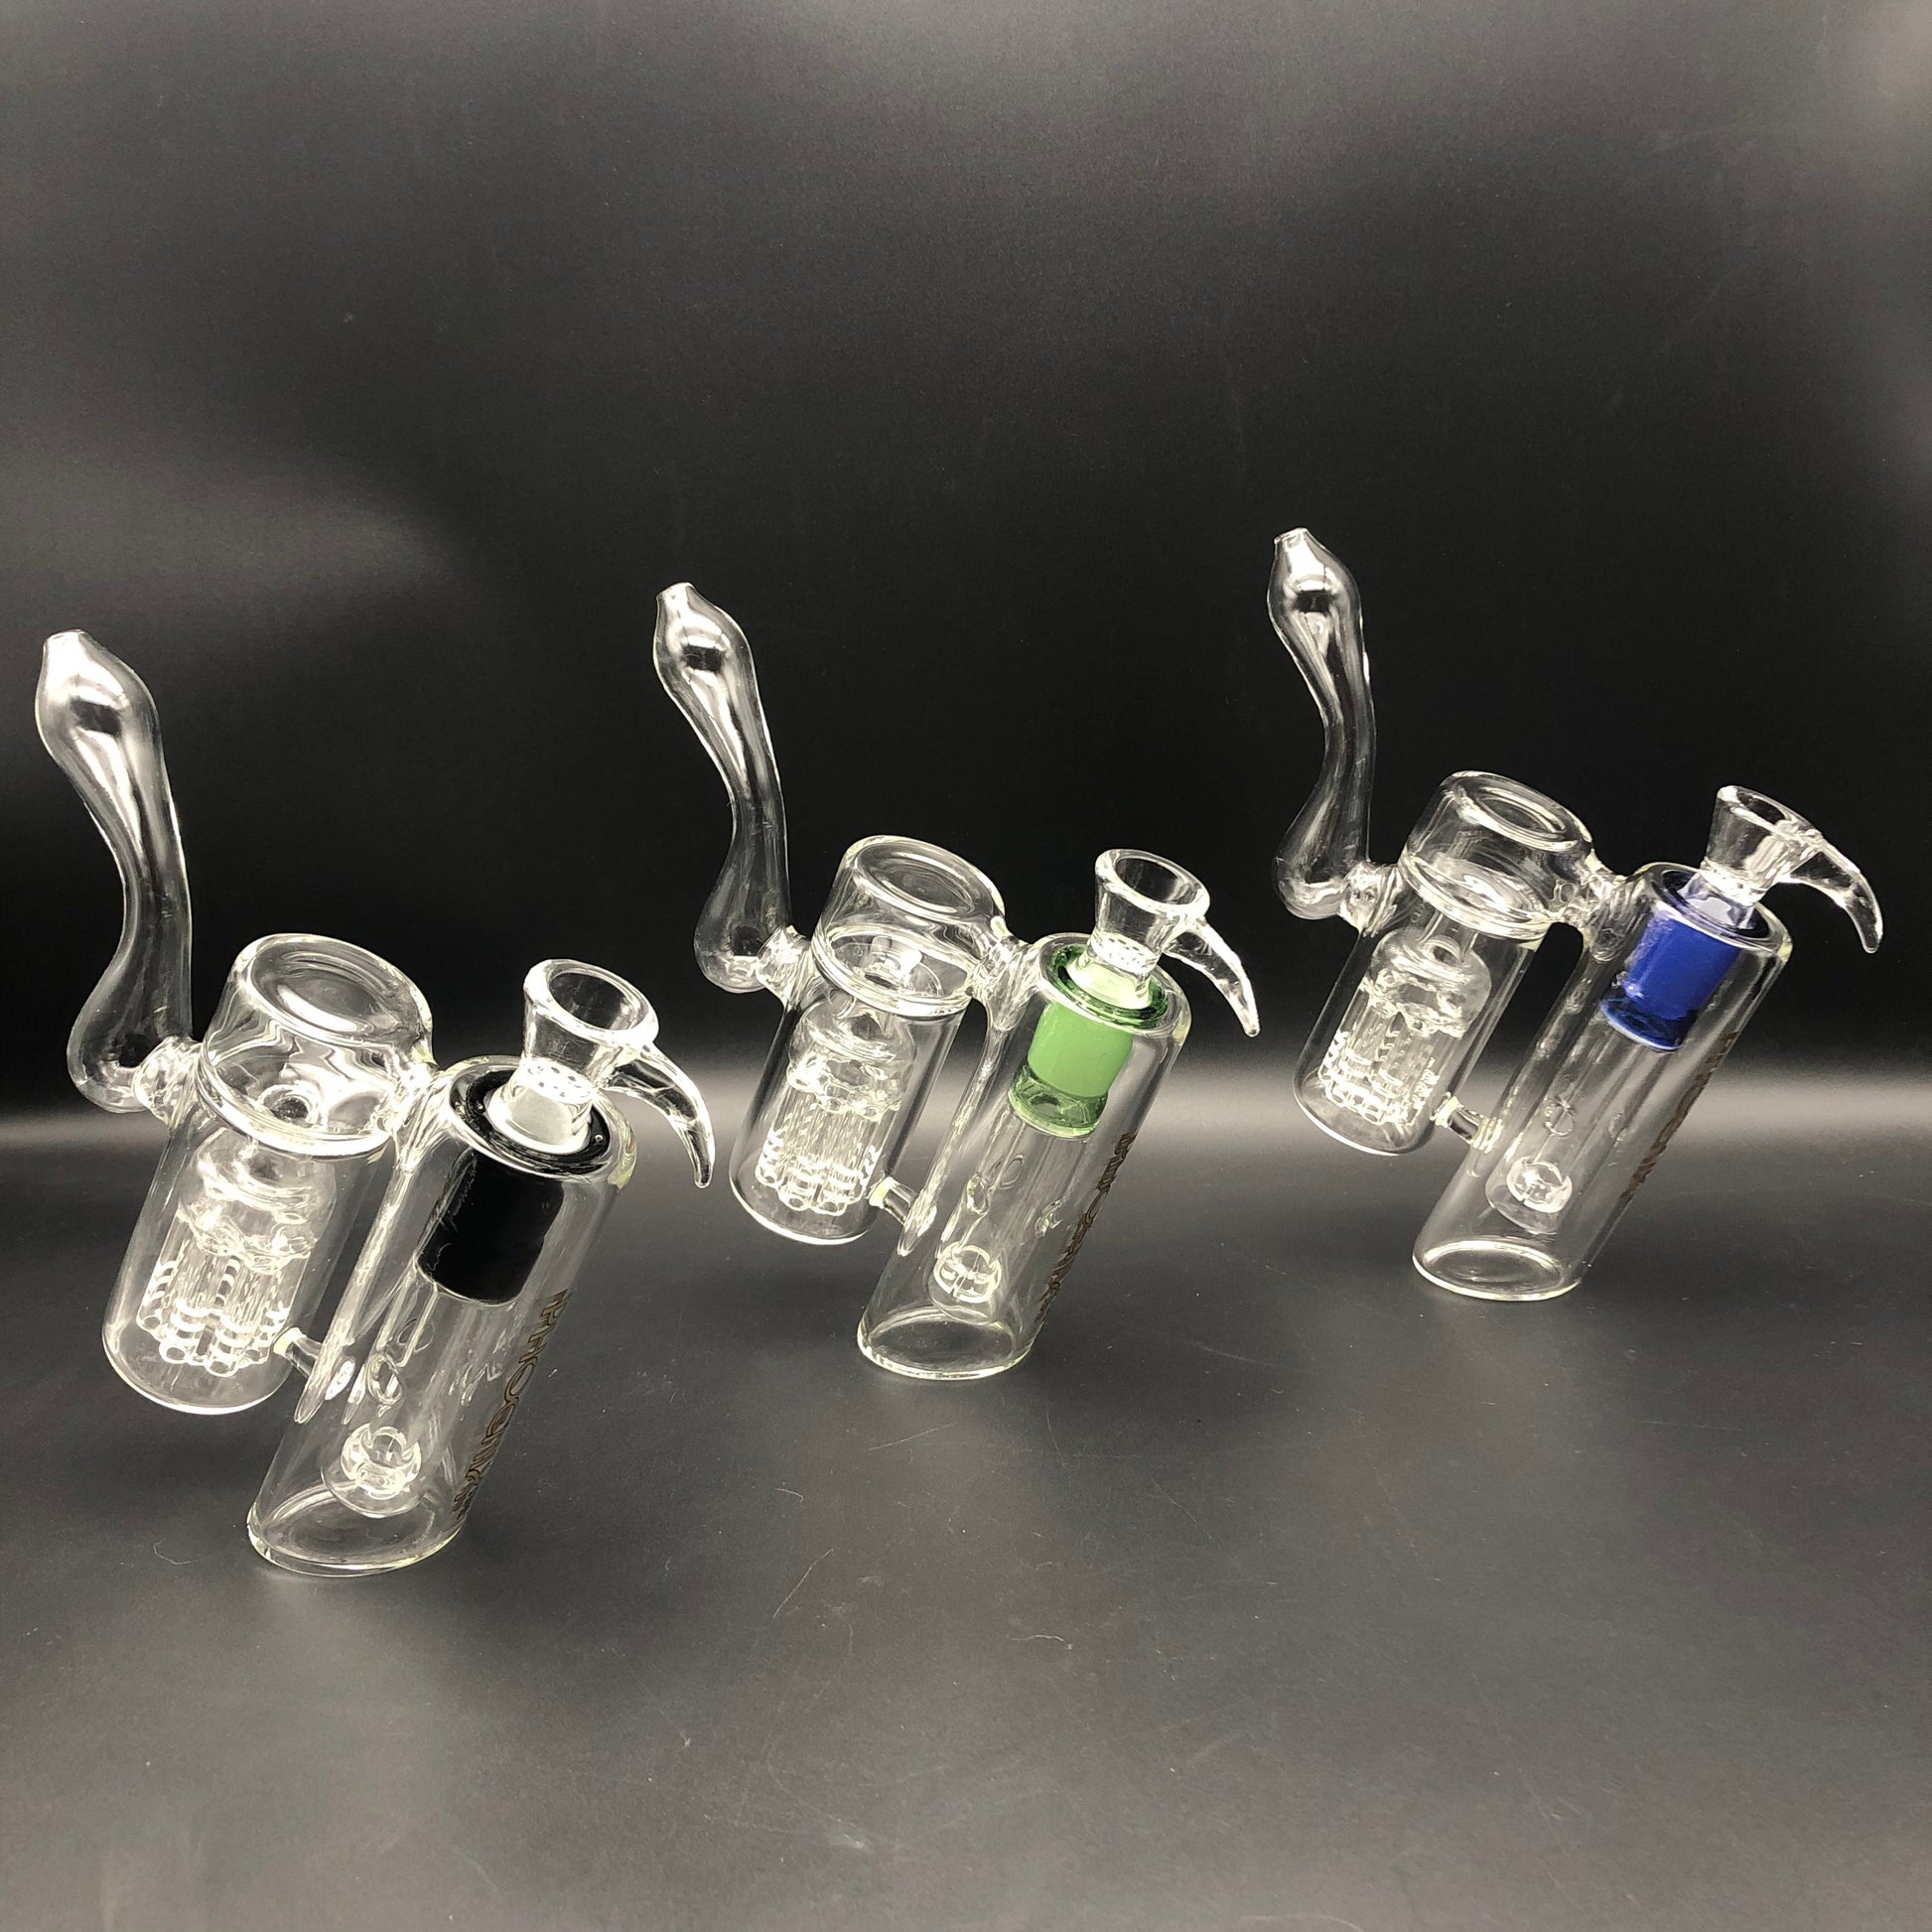 Dual Chamber Bubbler w/ 8-Arm and Showerhead Perc